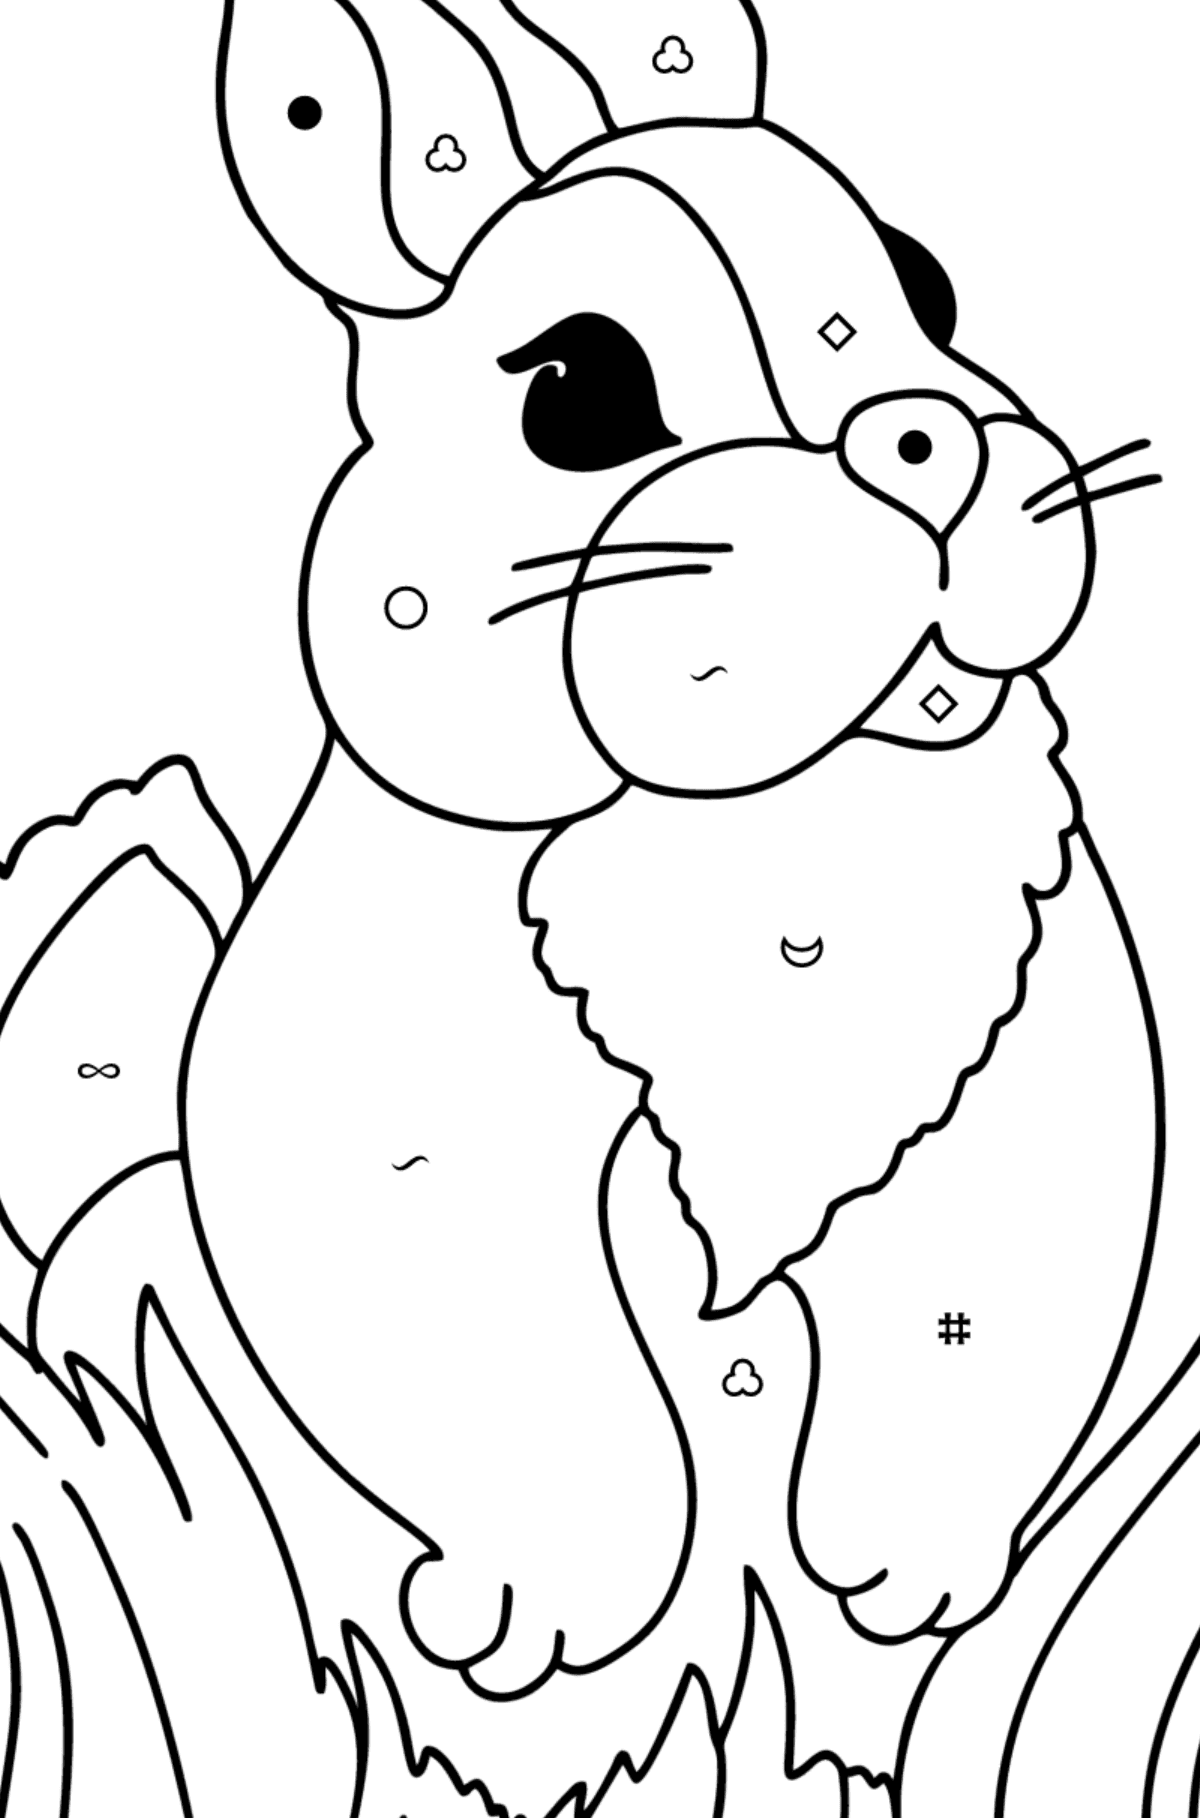 Fluffy Bunny Coloring page - Coloring by Symbols and Geometric Shapes for Kids